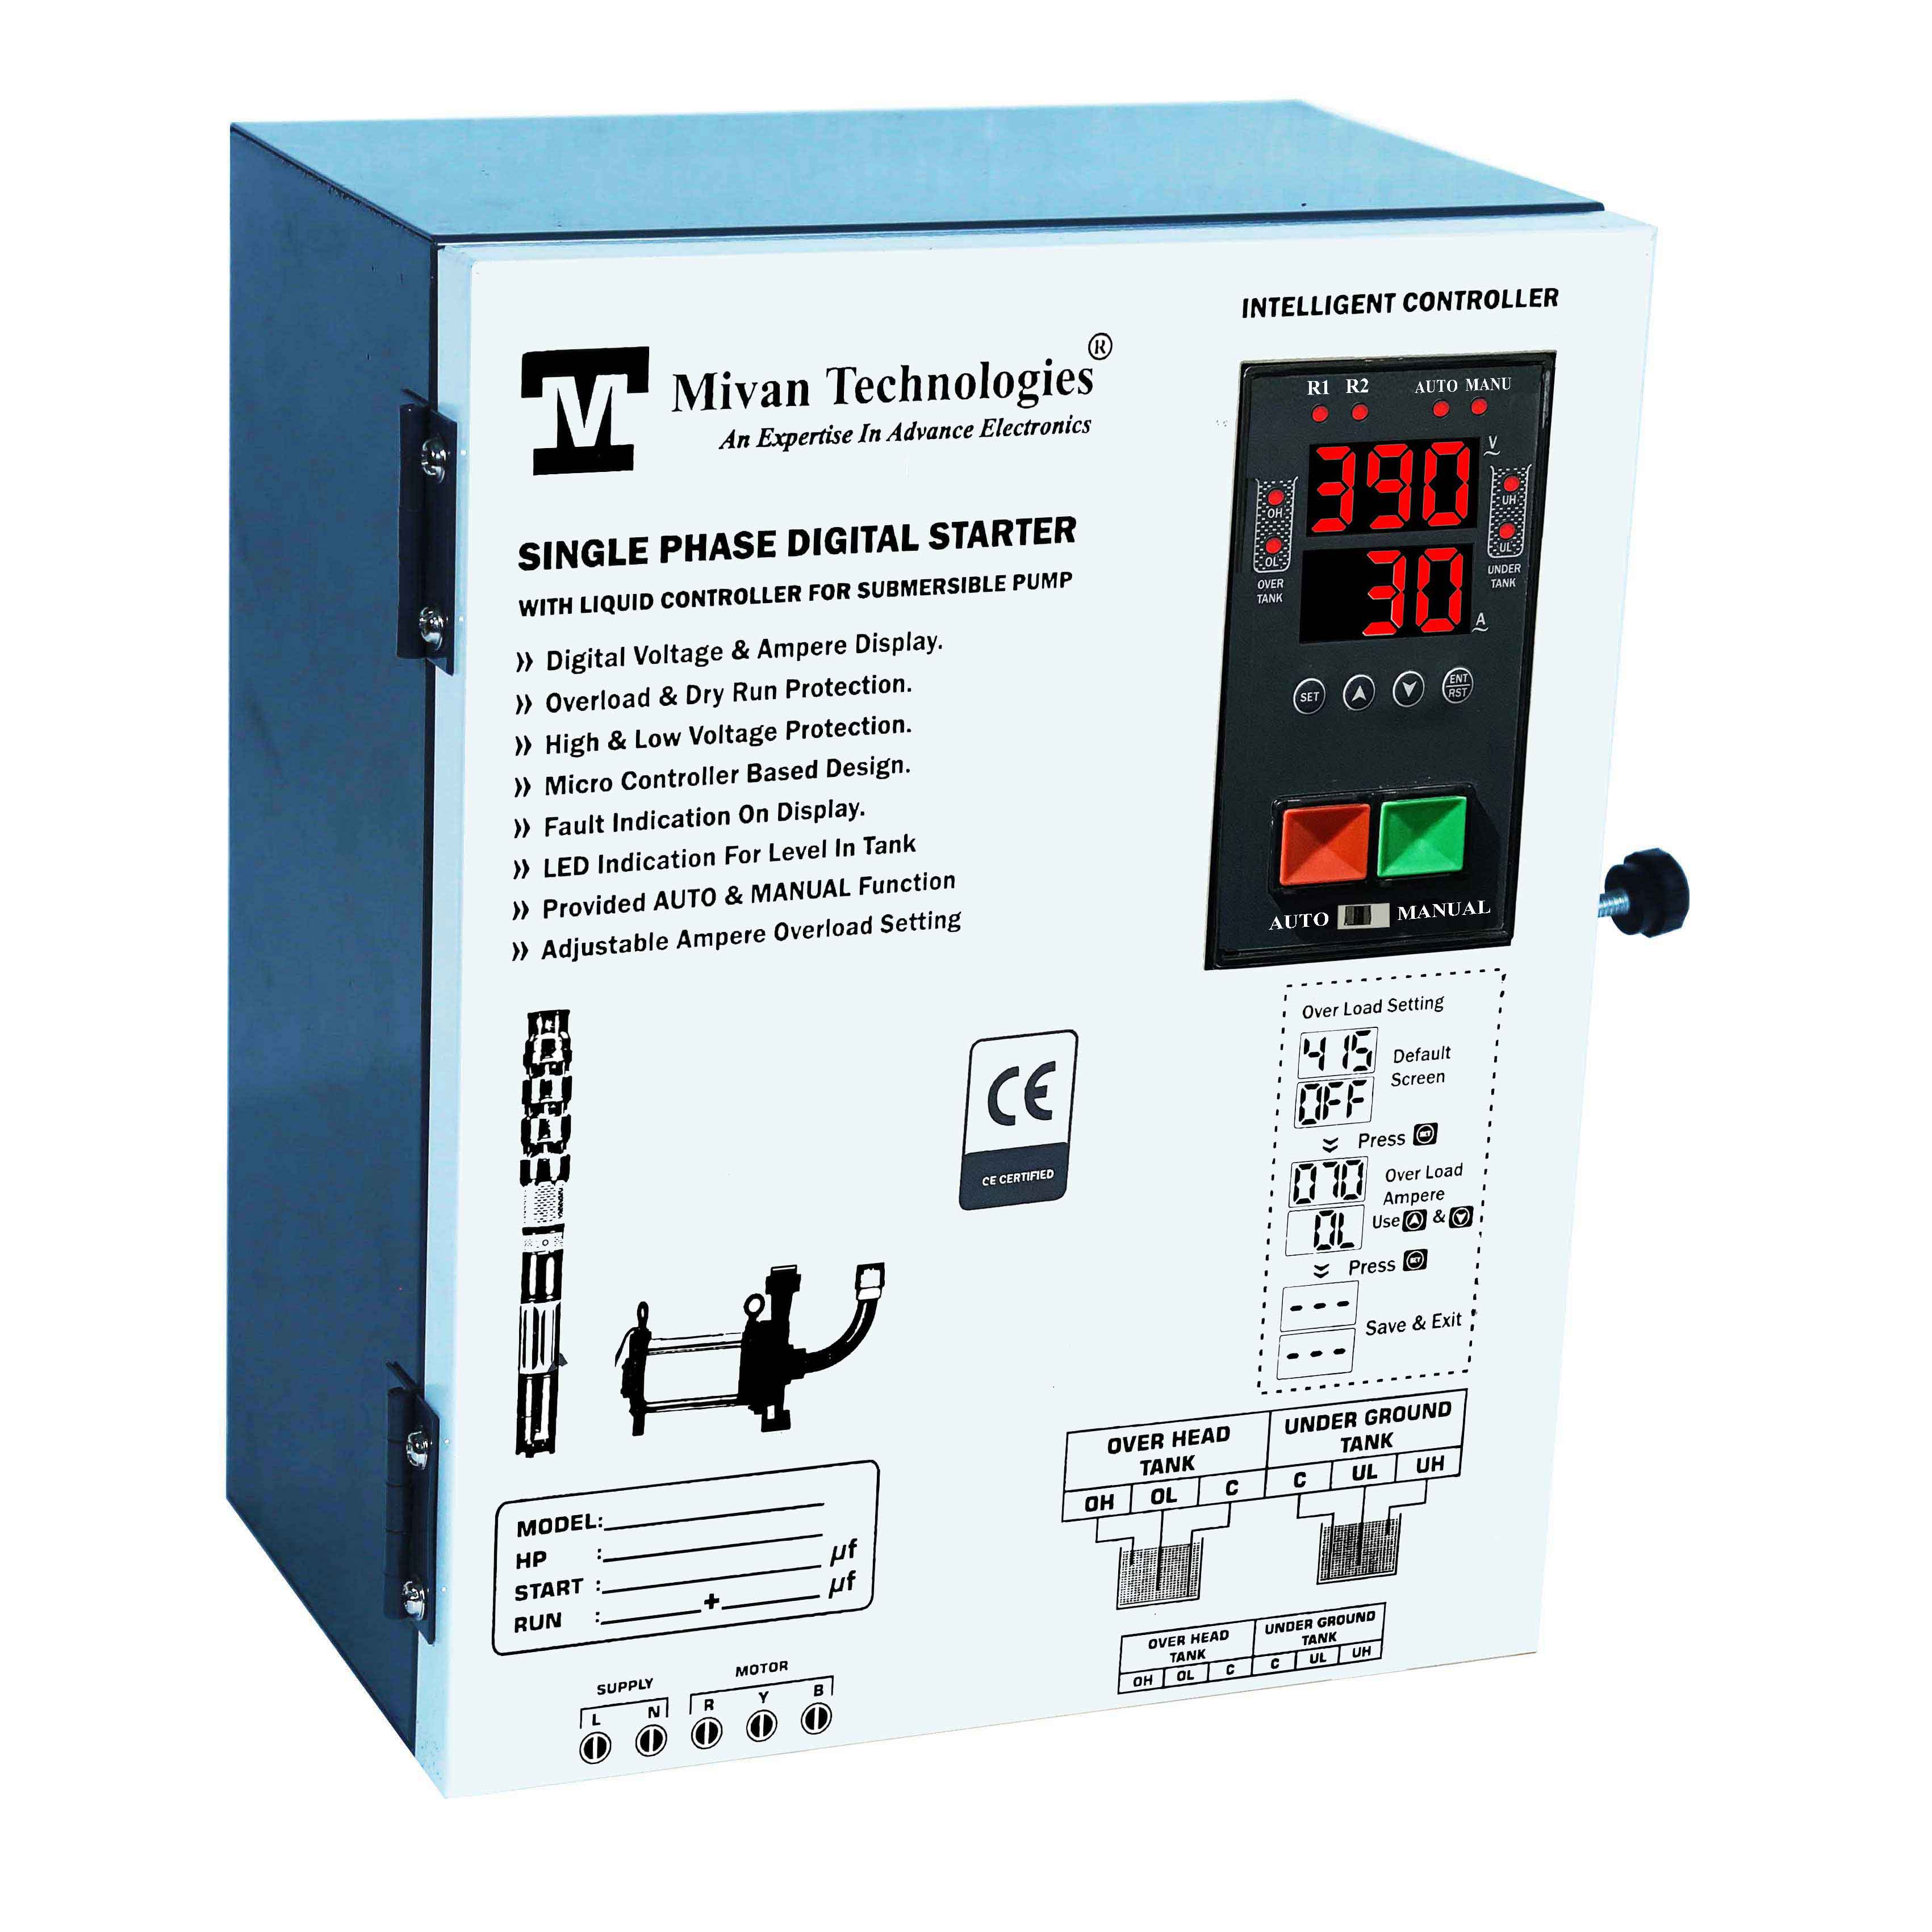 DSL SR for 1 HP motor Digital water controller and starter panel with volt and amp meter with HV LV OL DRY protection cyclic timer